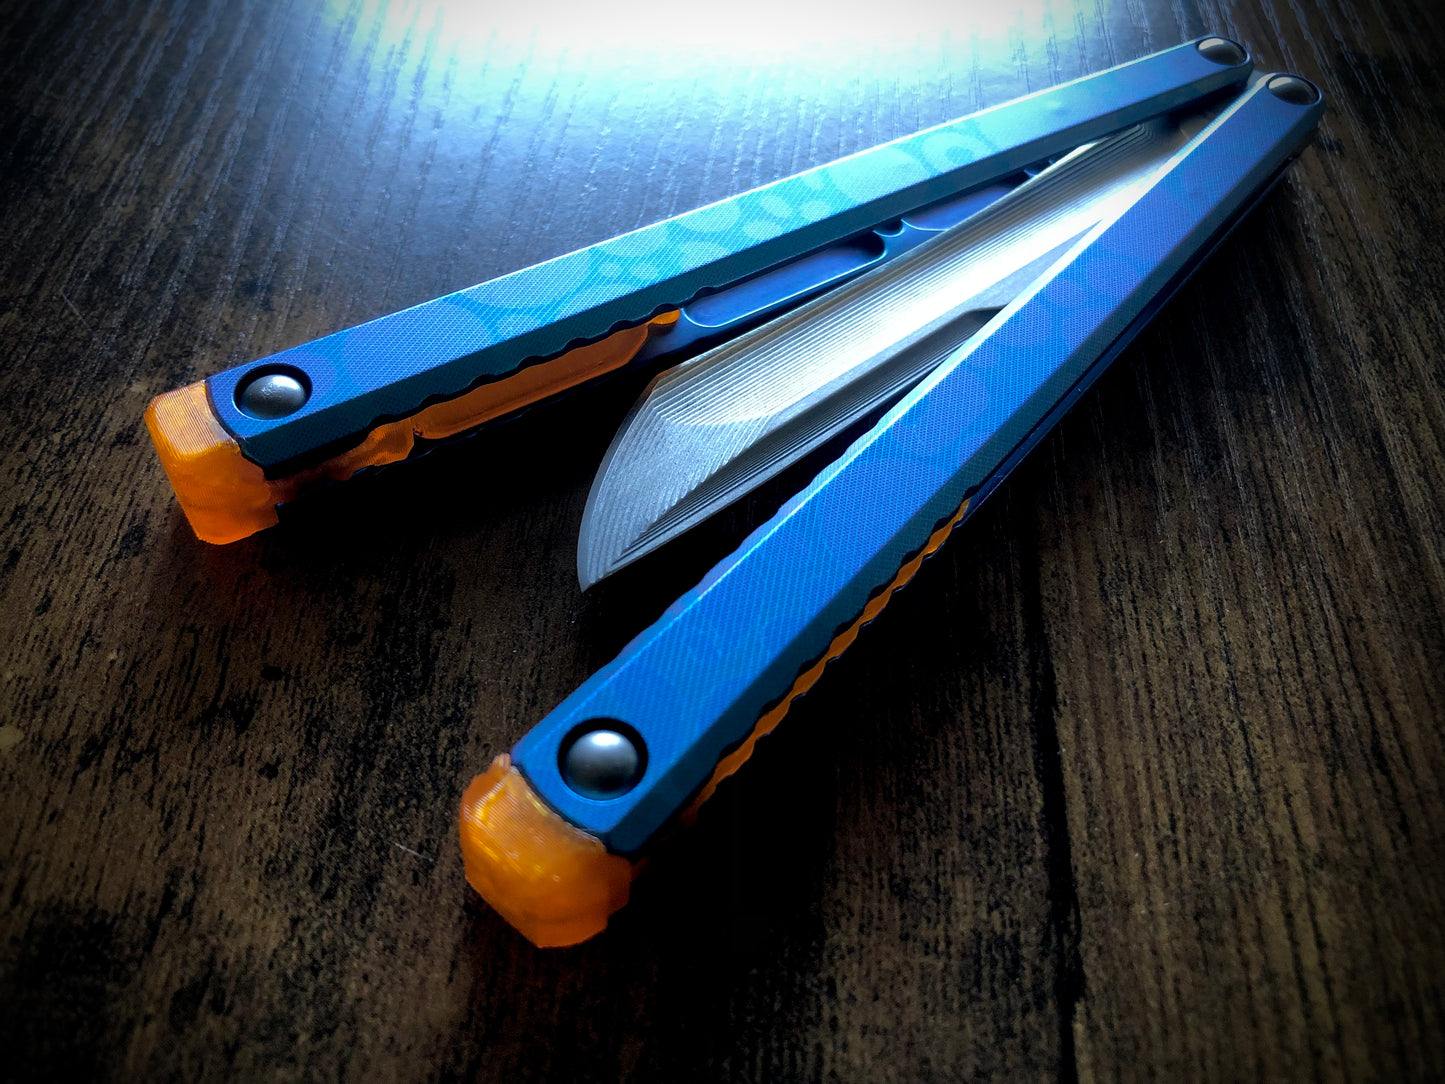 These Zippy spacers designed for the Fellowship Blades Gaboon balisong are made in-house from a rubbery, shatter-proof polyurethane. They add&nbsp;additional&nbsp;jimping to the Gaboon, provide a more neutral balance, and are also available as extensions which add handle length, protect the handles from drops, and include an adjustable tungsten weight system.